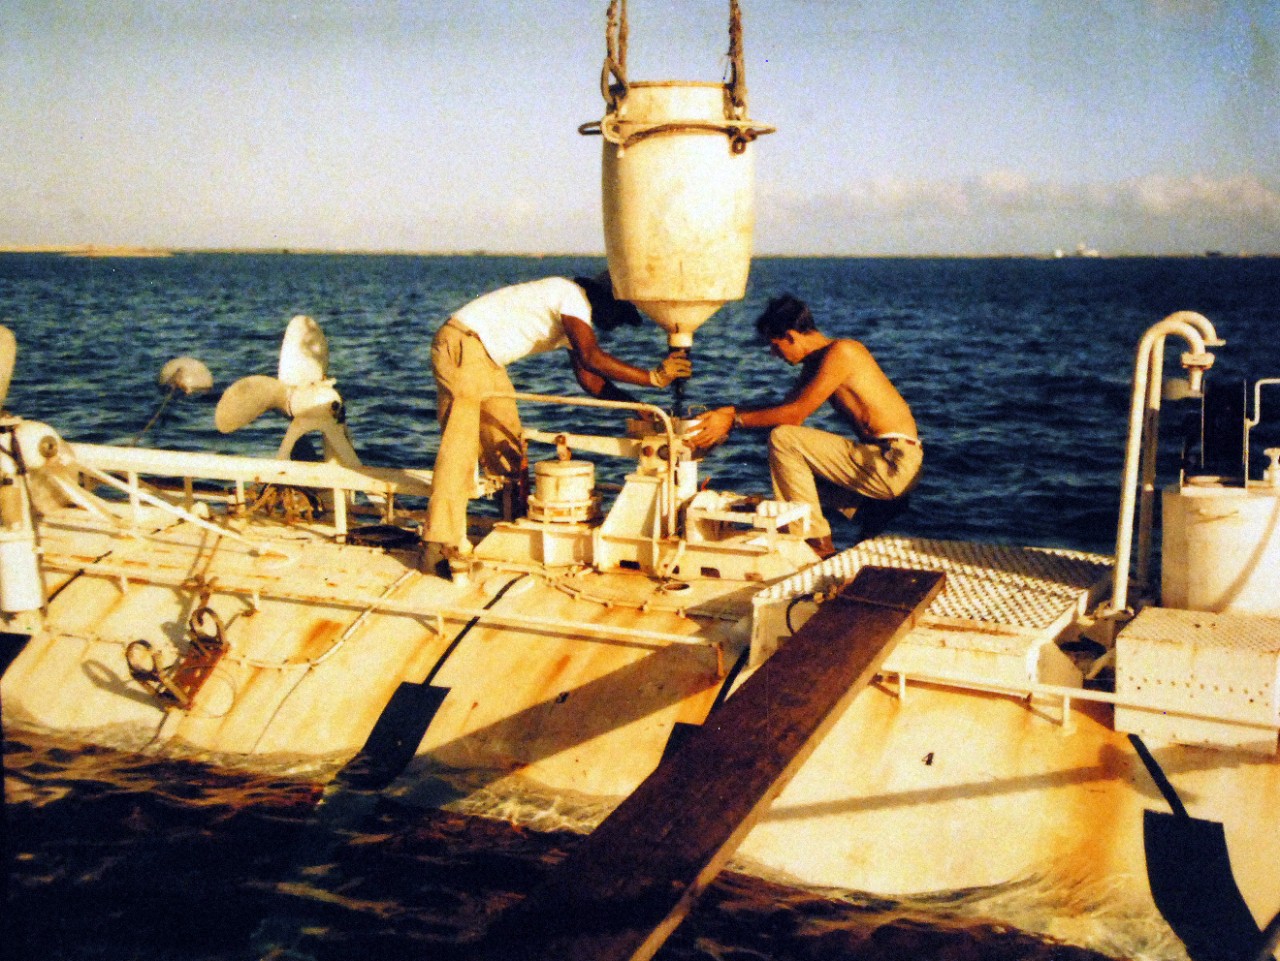 428-GX-KN-690:  U.S. Navy Bathyscaph Trieste, 1959.       Ship Repair Facility, Guam.  Jacques Piccard and Earnest Vigil load iron shot, which is used for ballast of the vessel, onboard the bathyscaph Trieste.  Photographed November 12, 1959.  (U.S. Navy Photograph now in the collections of the National Archives.  Note, photographed from reference card only.  (2016/02/17).  